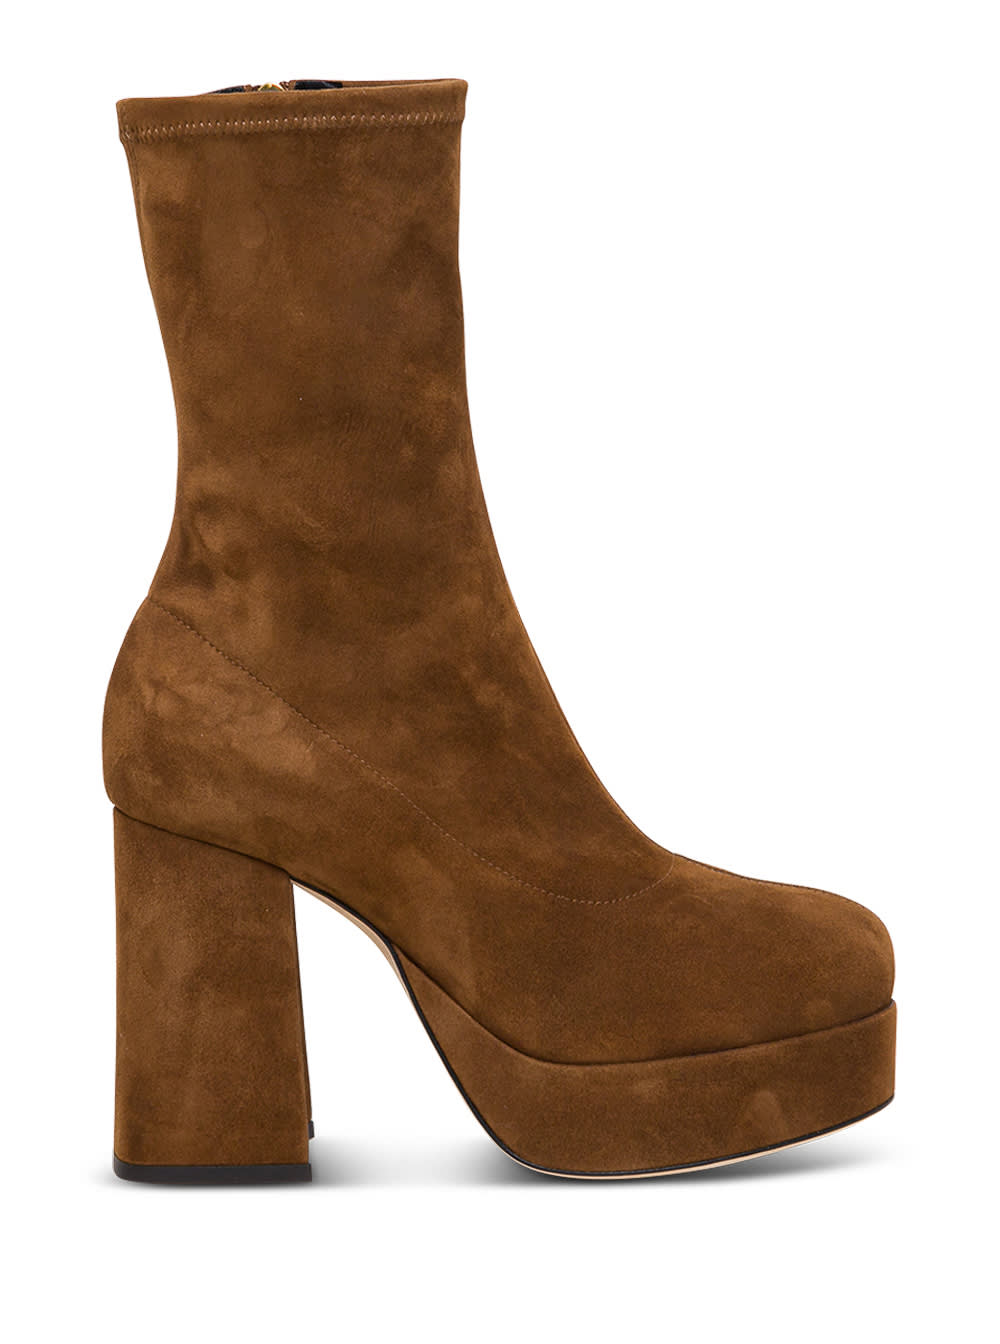 ALBERTA FERRETTI SUEDE LEATHER BOOTS WITH PLATFORM,A6106800496